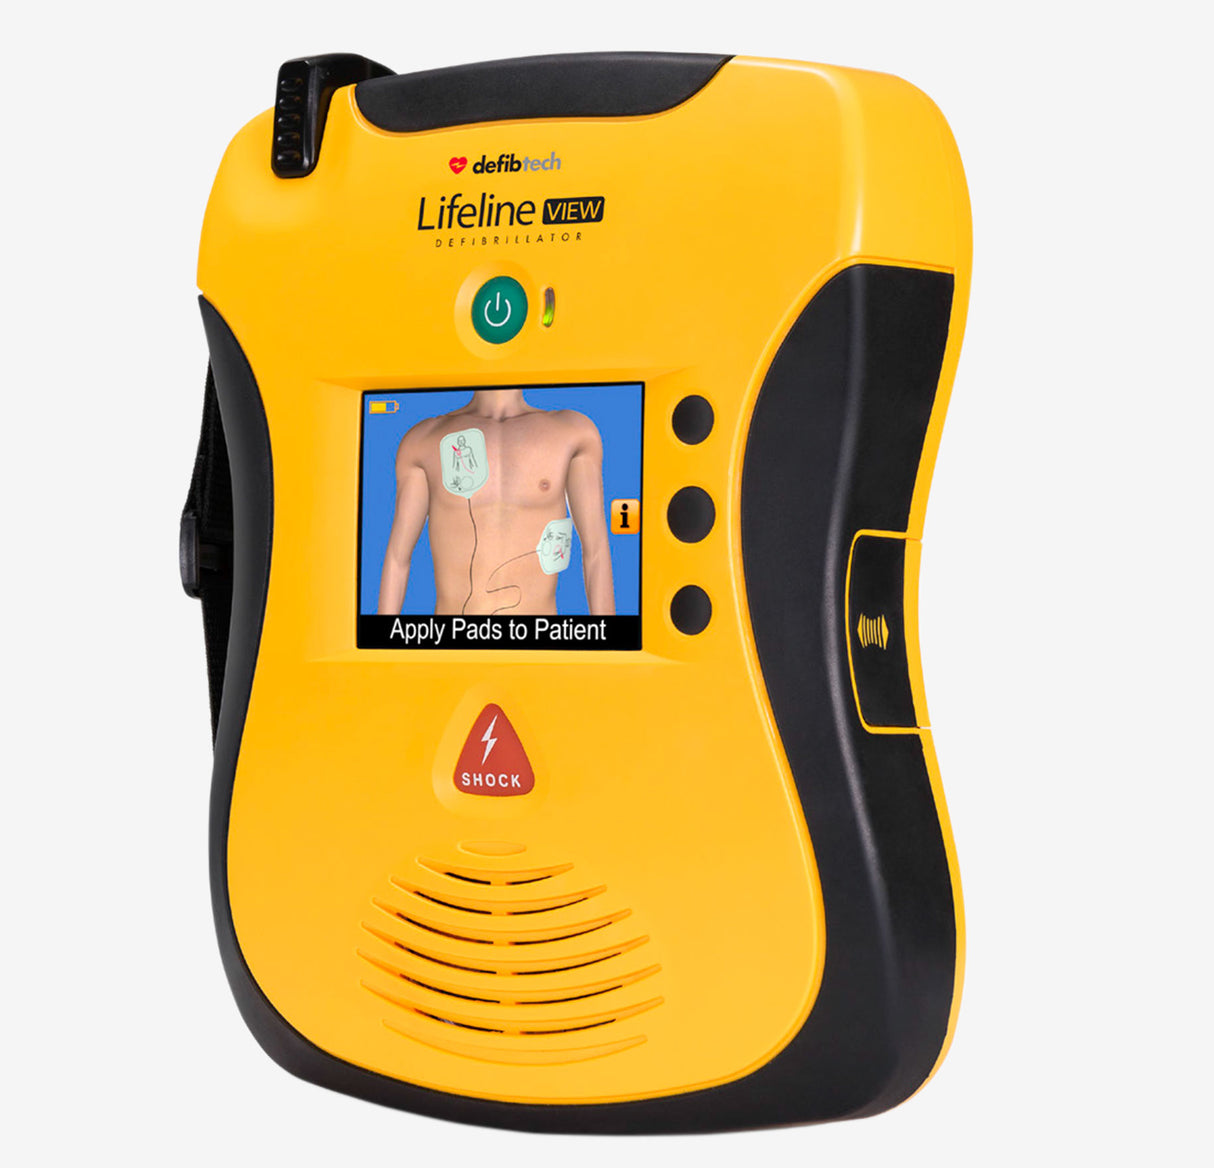 Defibtech Lifeline VIEW - Complete Package